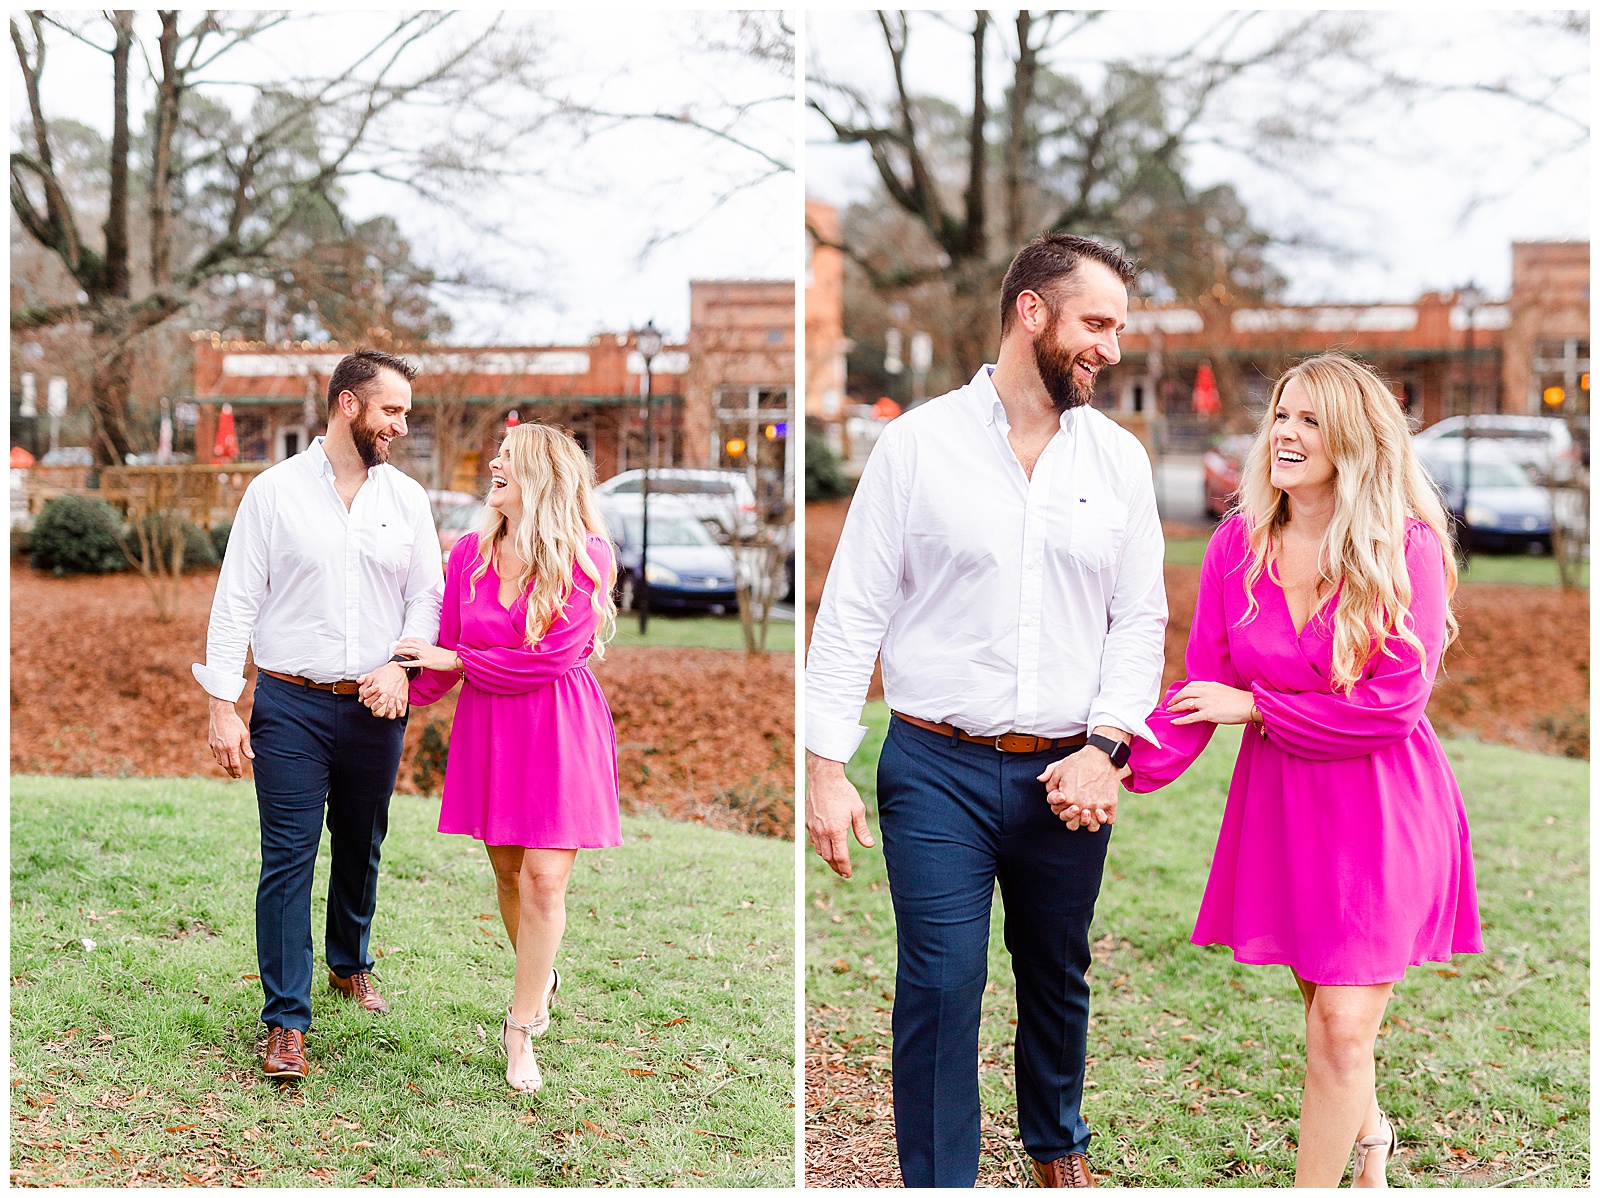 Adorable couple walking in front of train tracks in downtown Waxhaw, NC Engagement Session with Bright Hot Pink Dress Outfit Ideas